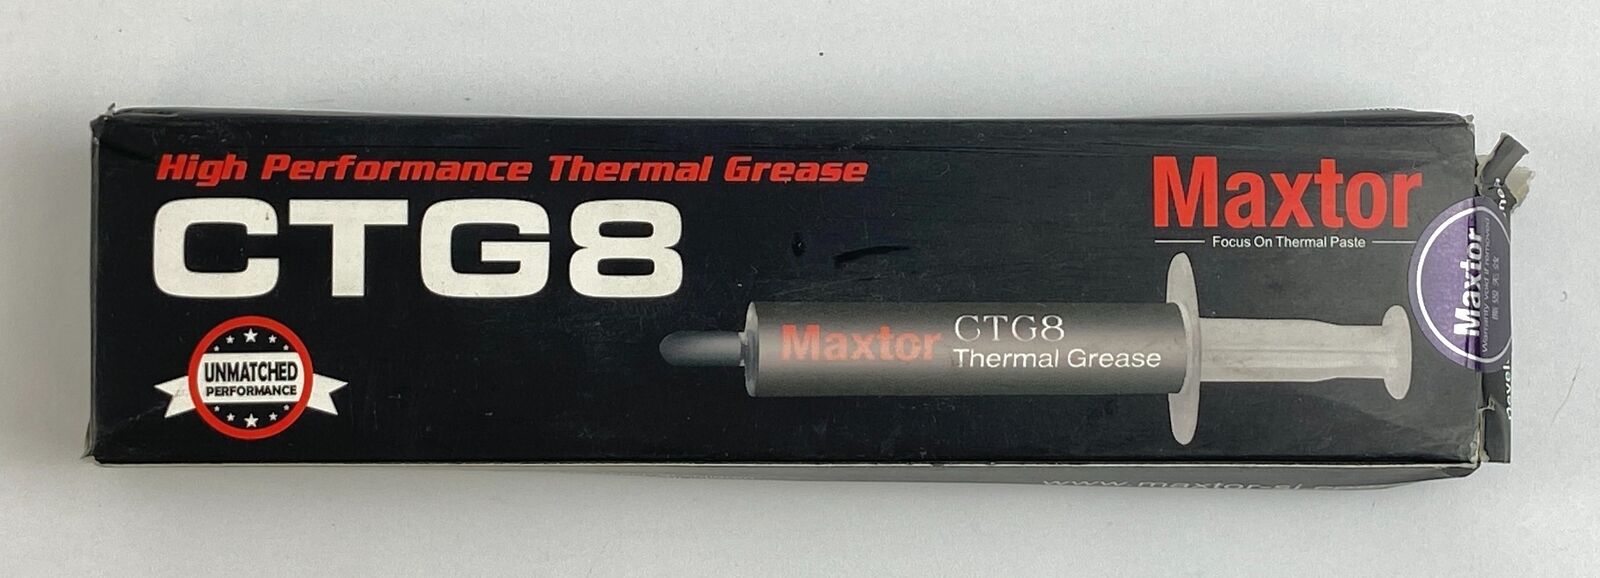 Maxtor High Performance Thermal Grease CTG8E 10g